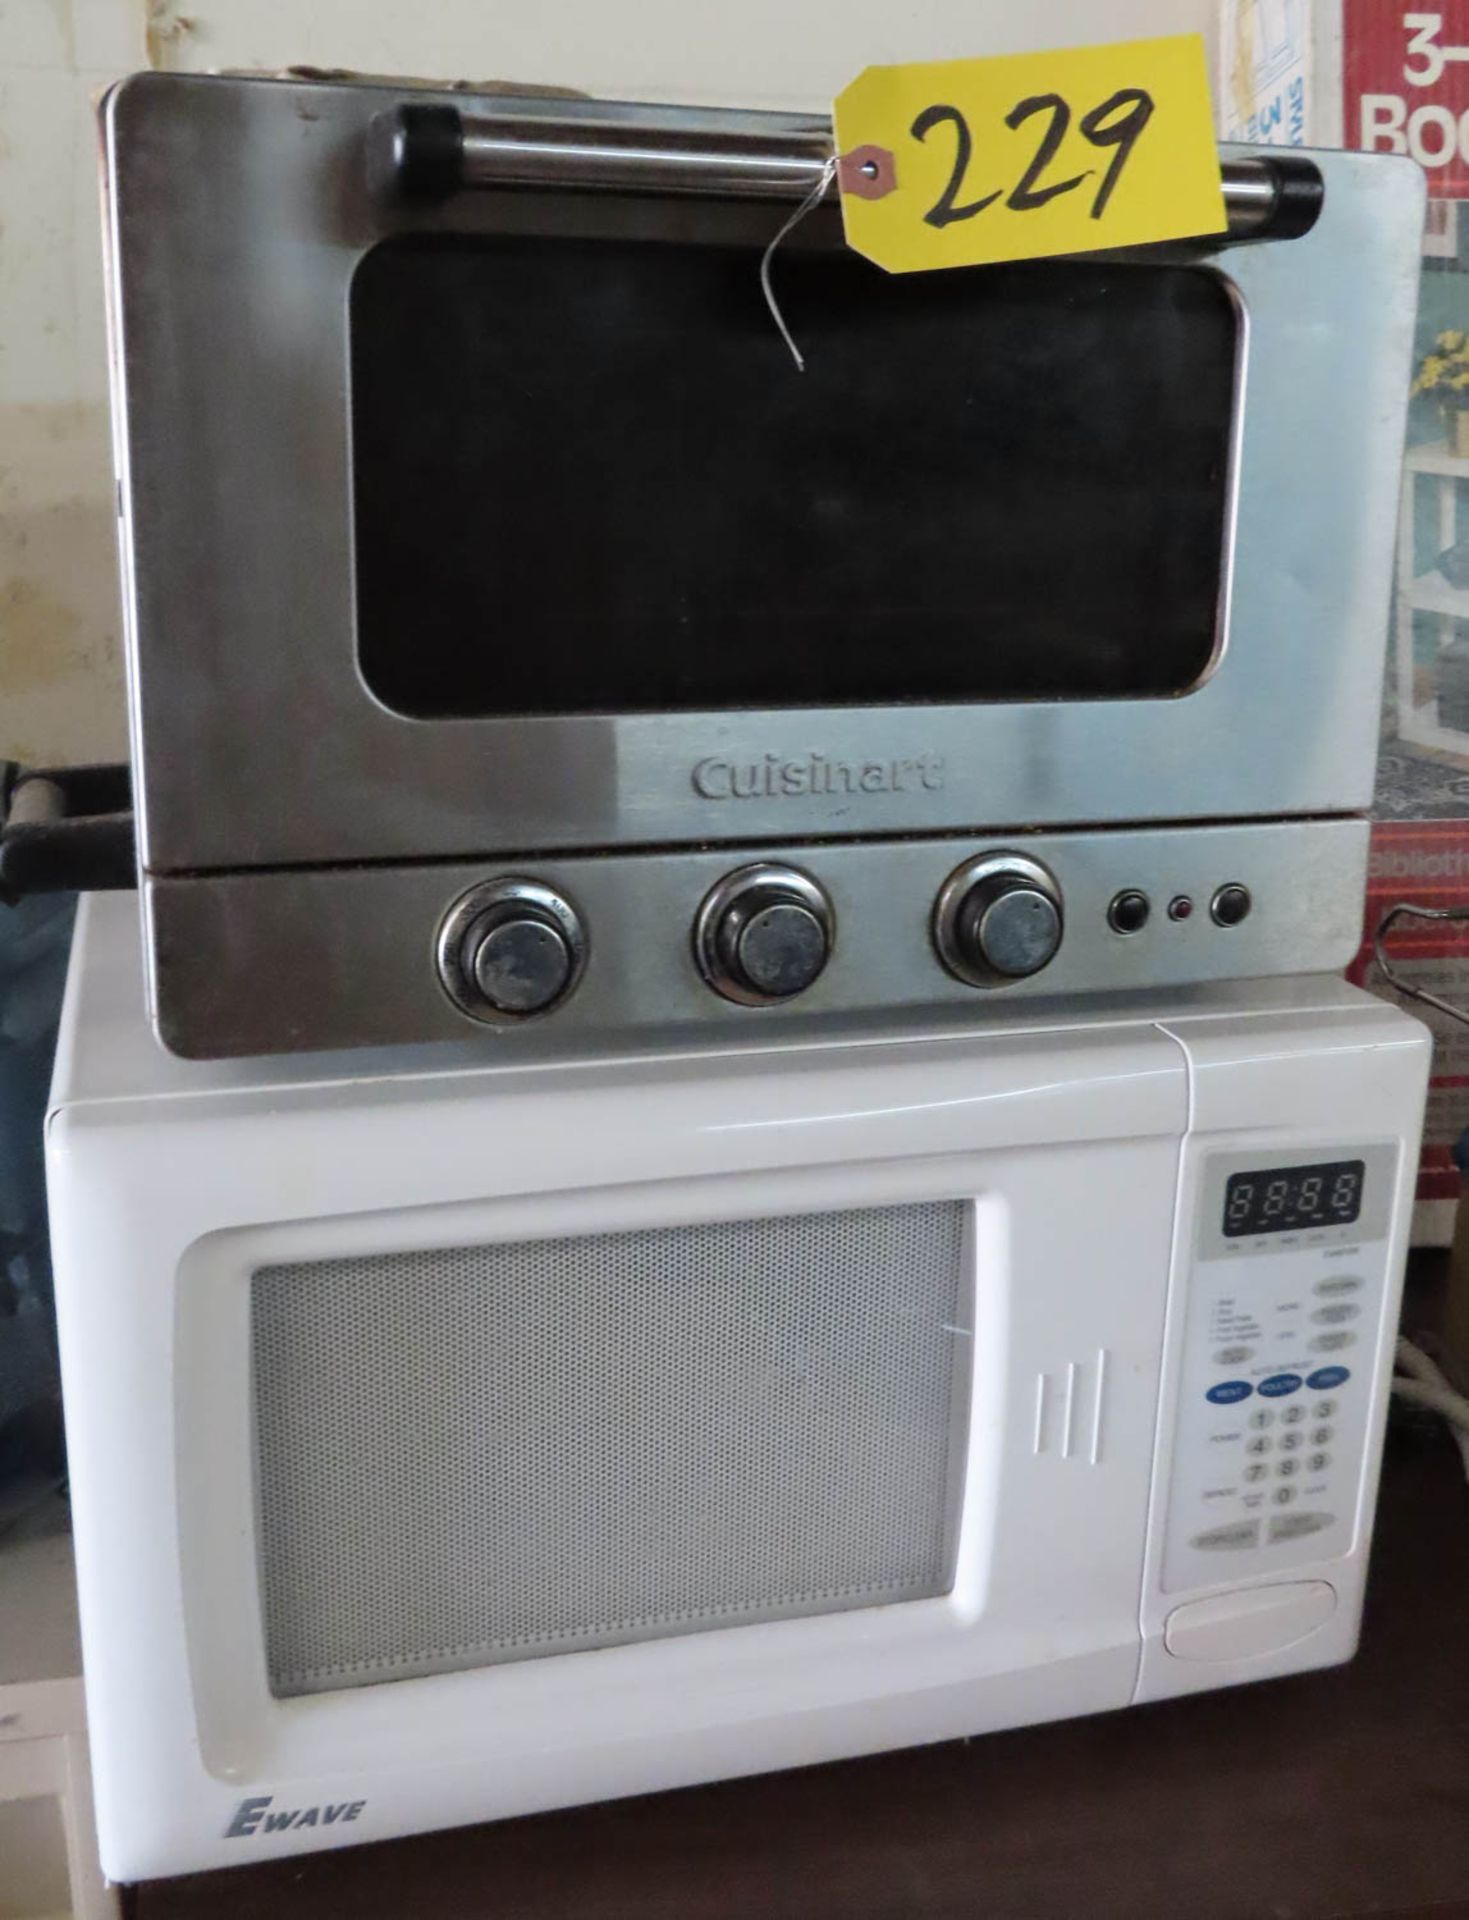 CUISINART TOASTER OVEN AND EZWAVE MICROWAVE